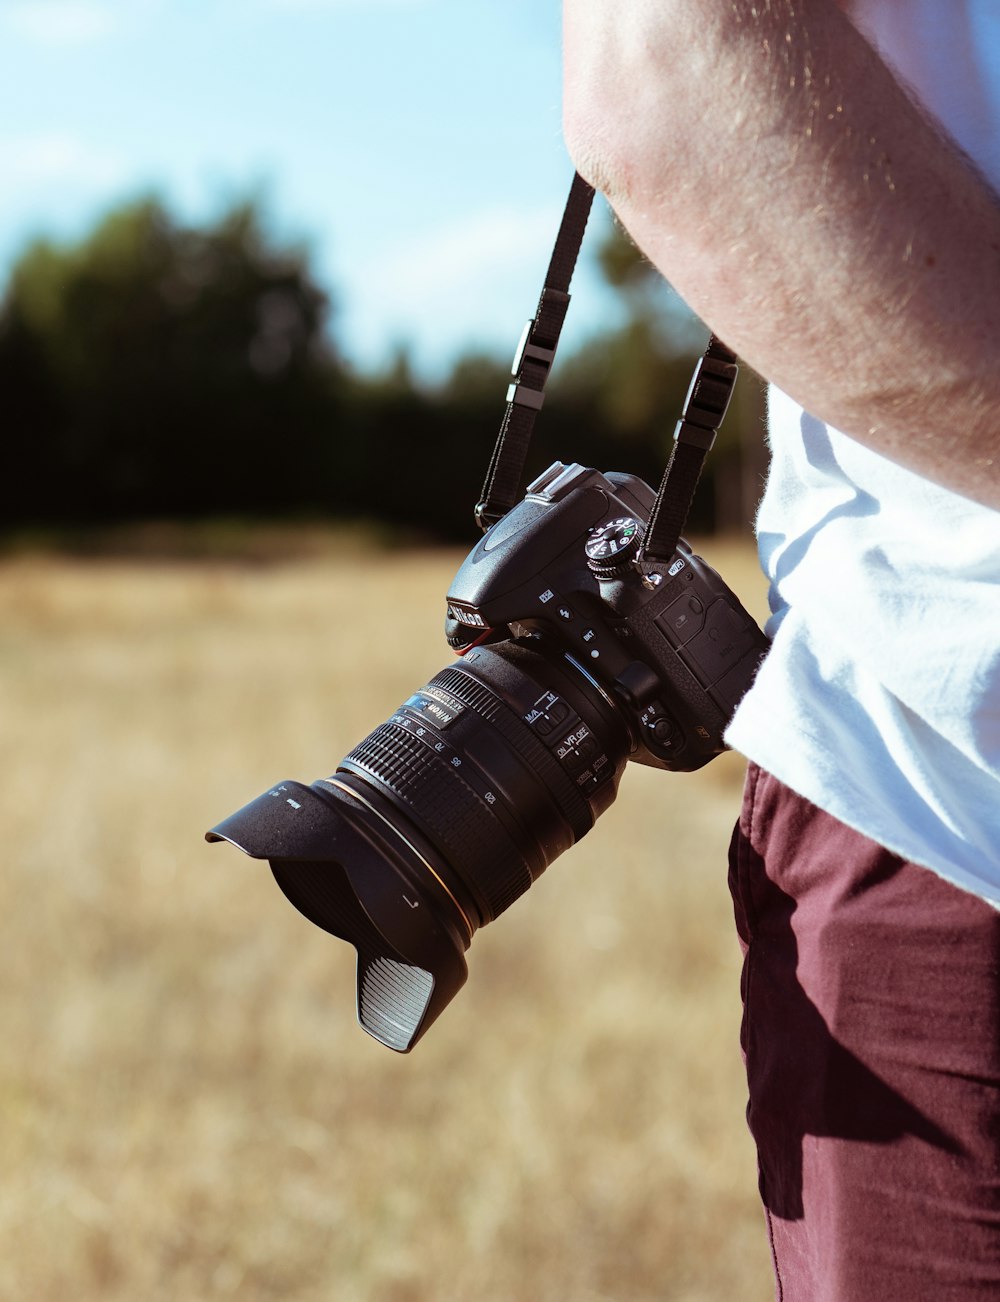 person holding camera standing on grass